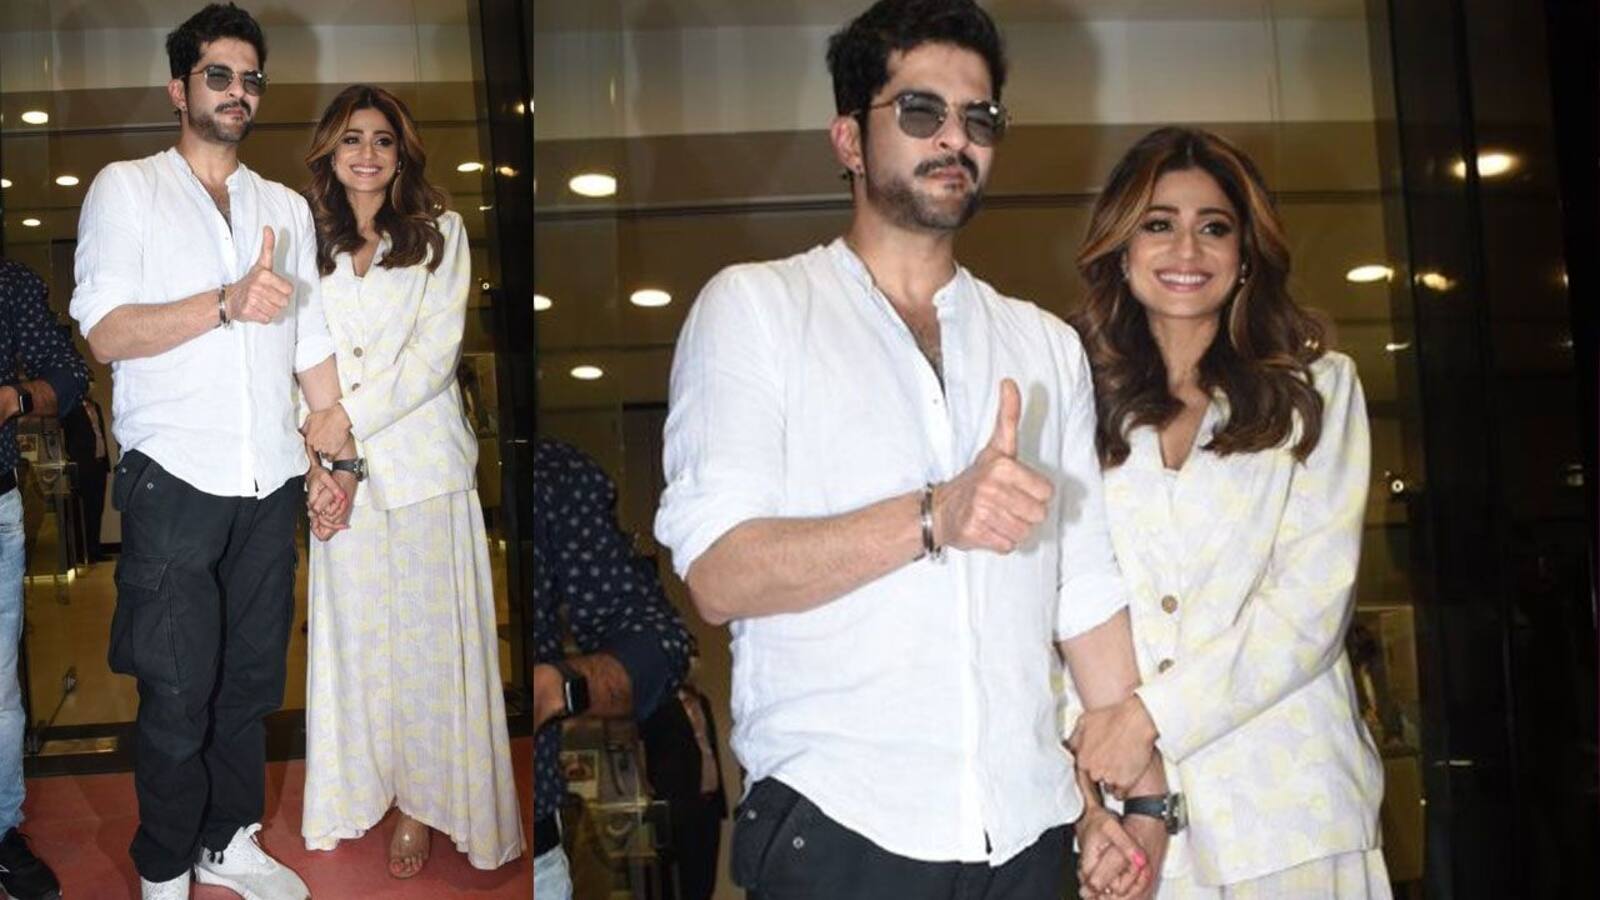 Shamita Shetty and Raqesh Bapat paint the town red with their strong bond!